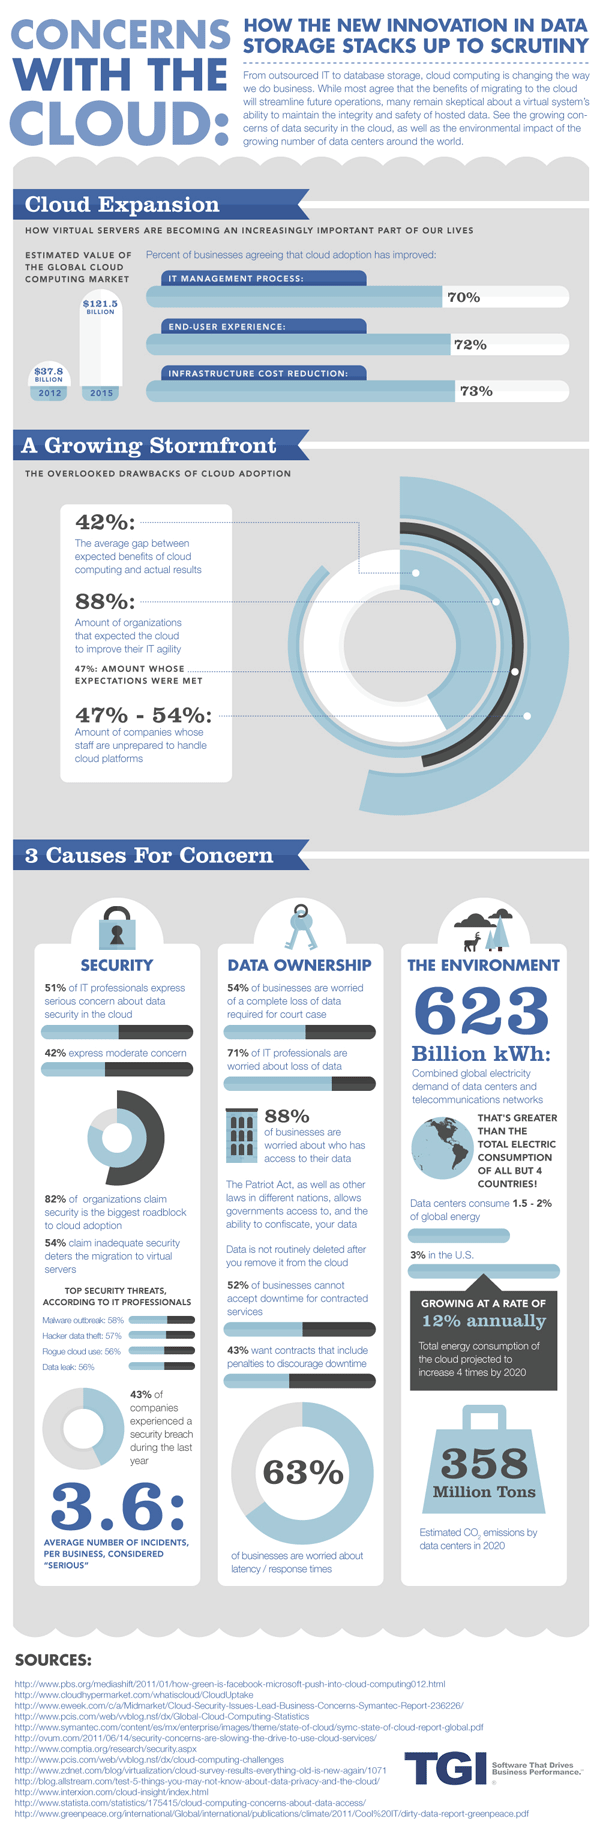 Concerns with the Cloud Infographic